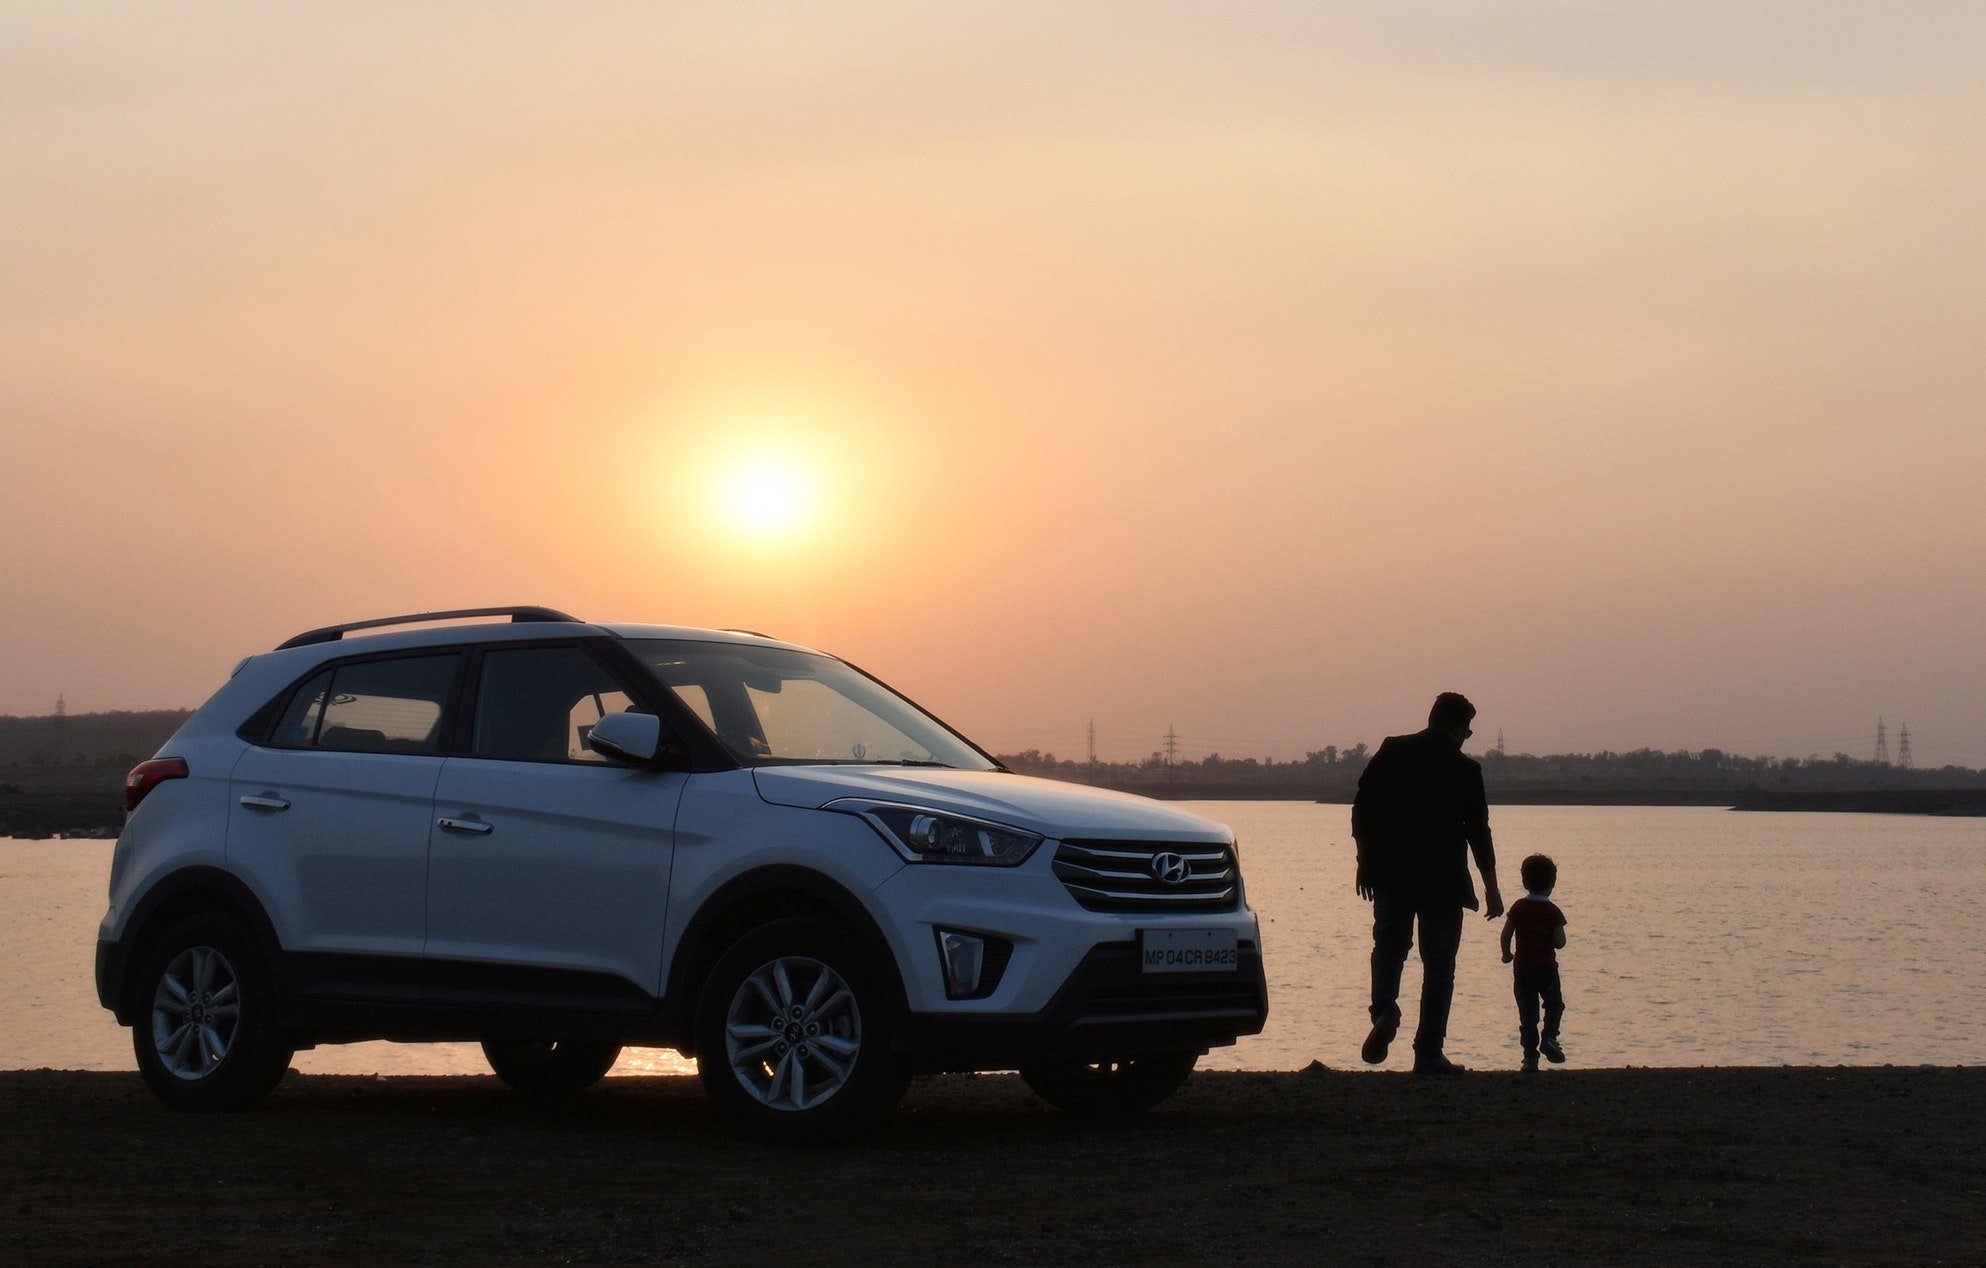 Pictured - A silhouette of a man and child near a white Hyundai Tucson SUV during the sunset | Source: Pexels 